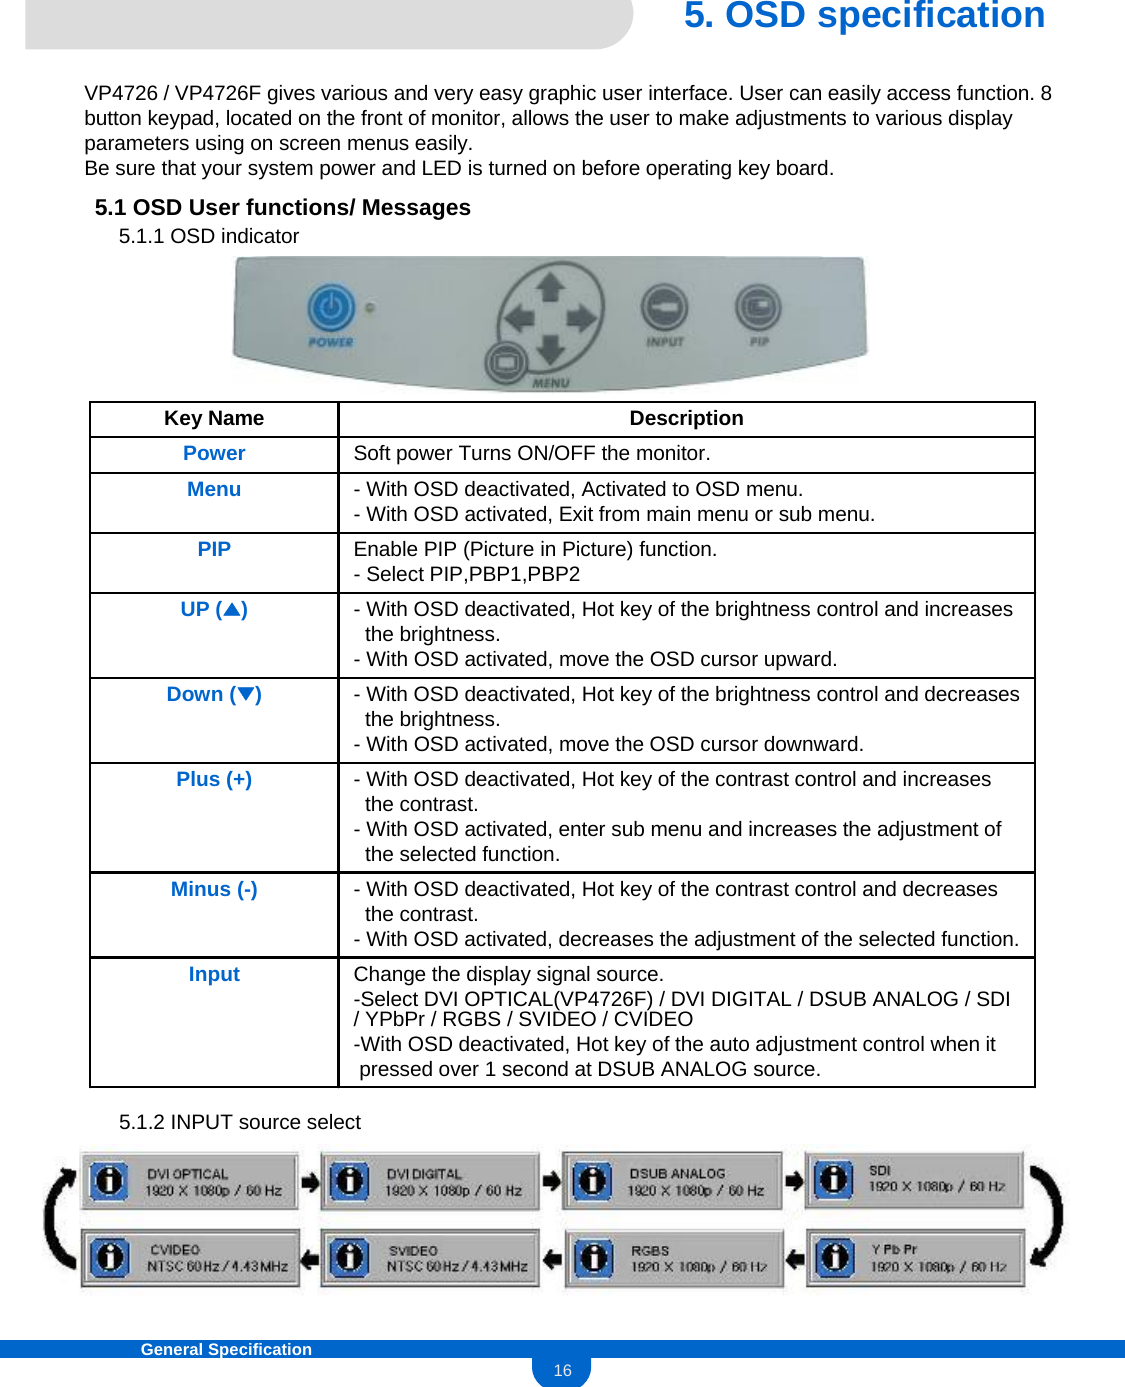 16General Specification 5.1 OSD User functions/ Messages Change the display signal source.-Select DVI OPTICAL(VP4726F) / DVI DIGITAL / DSUB ANALOG / SDI / YPbPr / RGBS / SVIDEO / CVIDEO -With OSD deactivated, Hot key of the auto adjustment control when it    pressed over 1 second at DSUB ANALOG source.Input- With OSD deactivated, Hot key of the contrast control and decreases the contrast.- With OSD activated, decreases the adjustment of the selected function.Minus (-)- With OSD deactivated, Hot key of the contrast control and increasesthe contrast.- With OSD activated, enter sub menu and increases the adjustment of the selected function.Plus (+)- With OSD deactivated, Hot key of the brightness control and decreasesthe brightness.- With OSD activated, move the OSD cursor downward.Down (▼)- With OSD deactivated, Activated to OSD menu.- With OSD activated, Exit from main menu or sub menu.Menu- With OSD deactivated, Hot key of the brightness control and increasesthe brightness.- With OSD activated, move the OSD cursor upward.UP (▲)Enable PIP (Picture in Picture) function.- Select PIP,PBP1,PBP2PIPSoft power Turns ON/OFF the monitor.PowerDescriptionKey Name5. OSD specification5.1.1 OSD indicator 5.1.2 INPUT source select VP4726 / VP4726F gives various and very easy graphic user interface. User can easily access function. 8 button keypad, located on the front of monitor, allows the user to make adjustments to various display parameters using on screen menus easily. Be sure that your system power and LED is turned on before operating key board. 